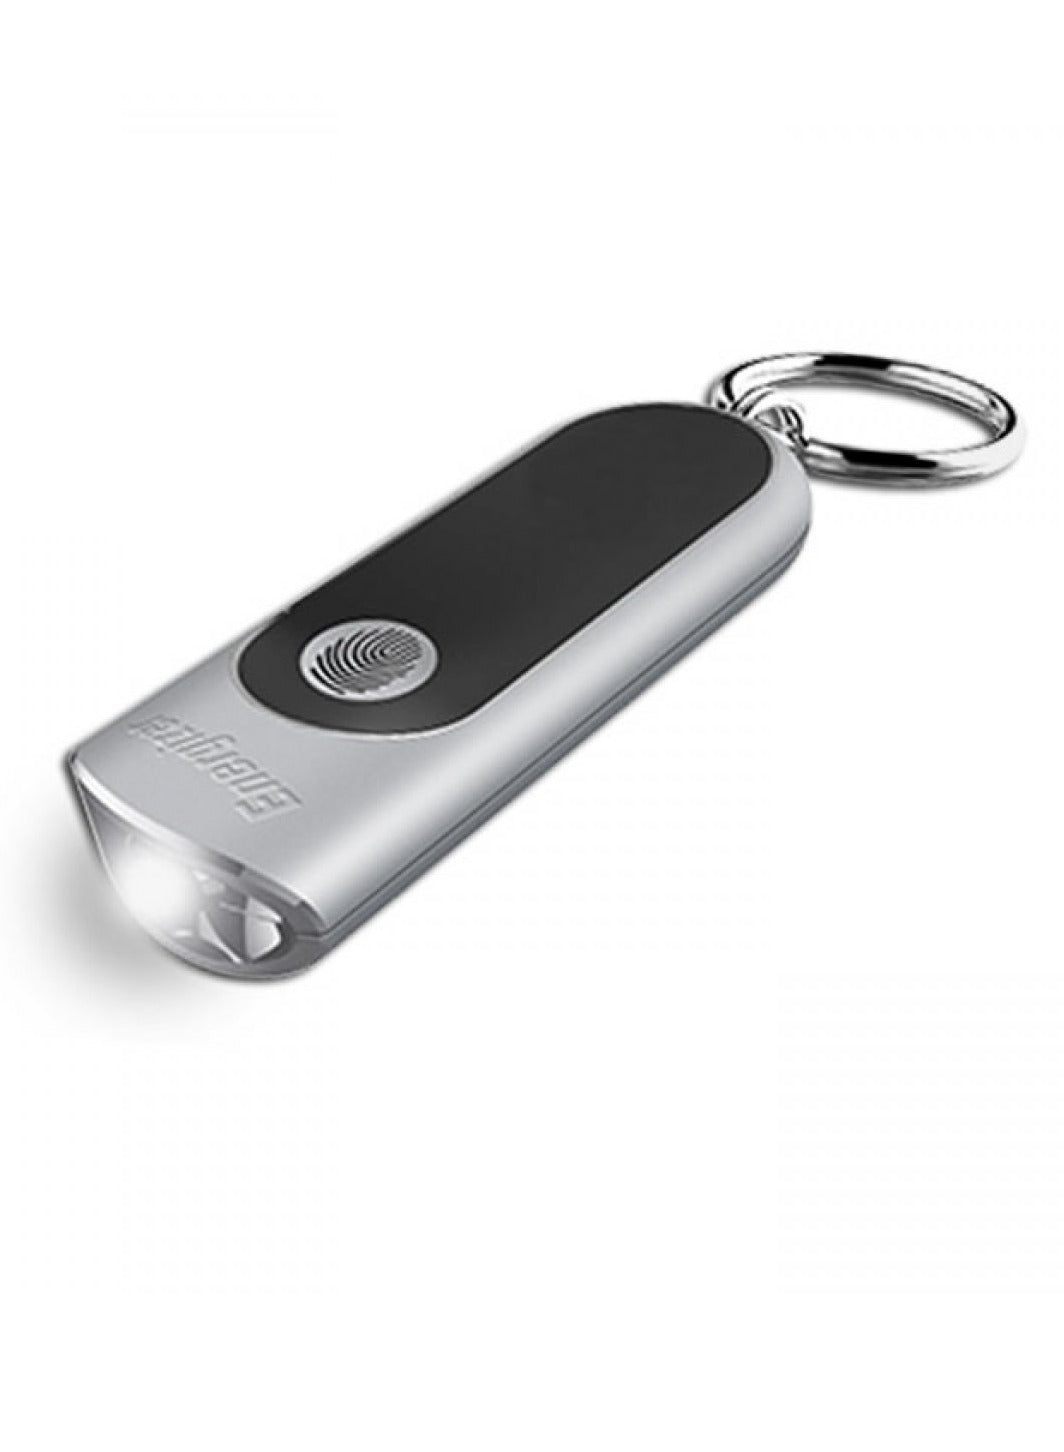 Energizer Touch switch Touch-Tech LED Keyring torch battery-powered 20 lm